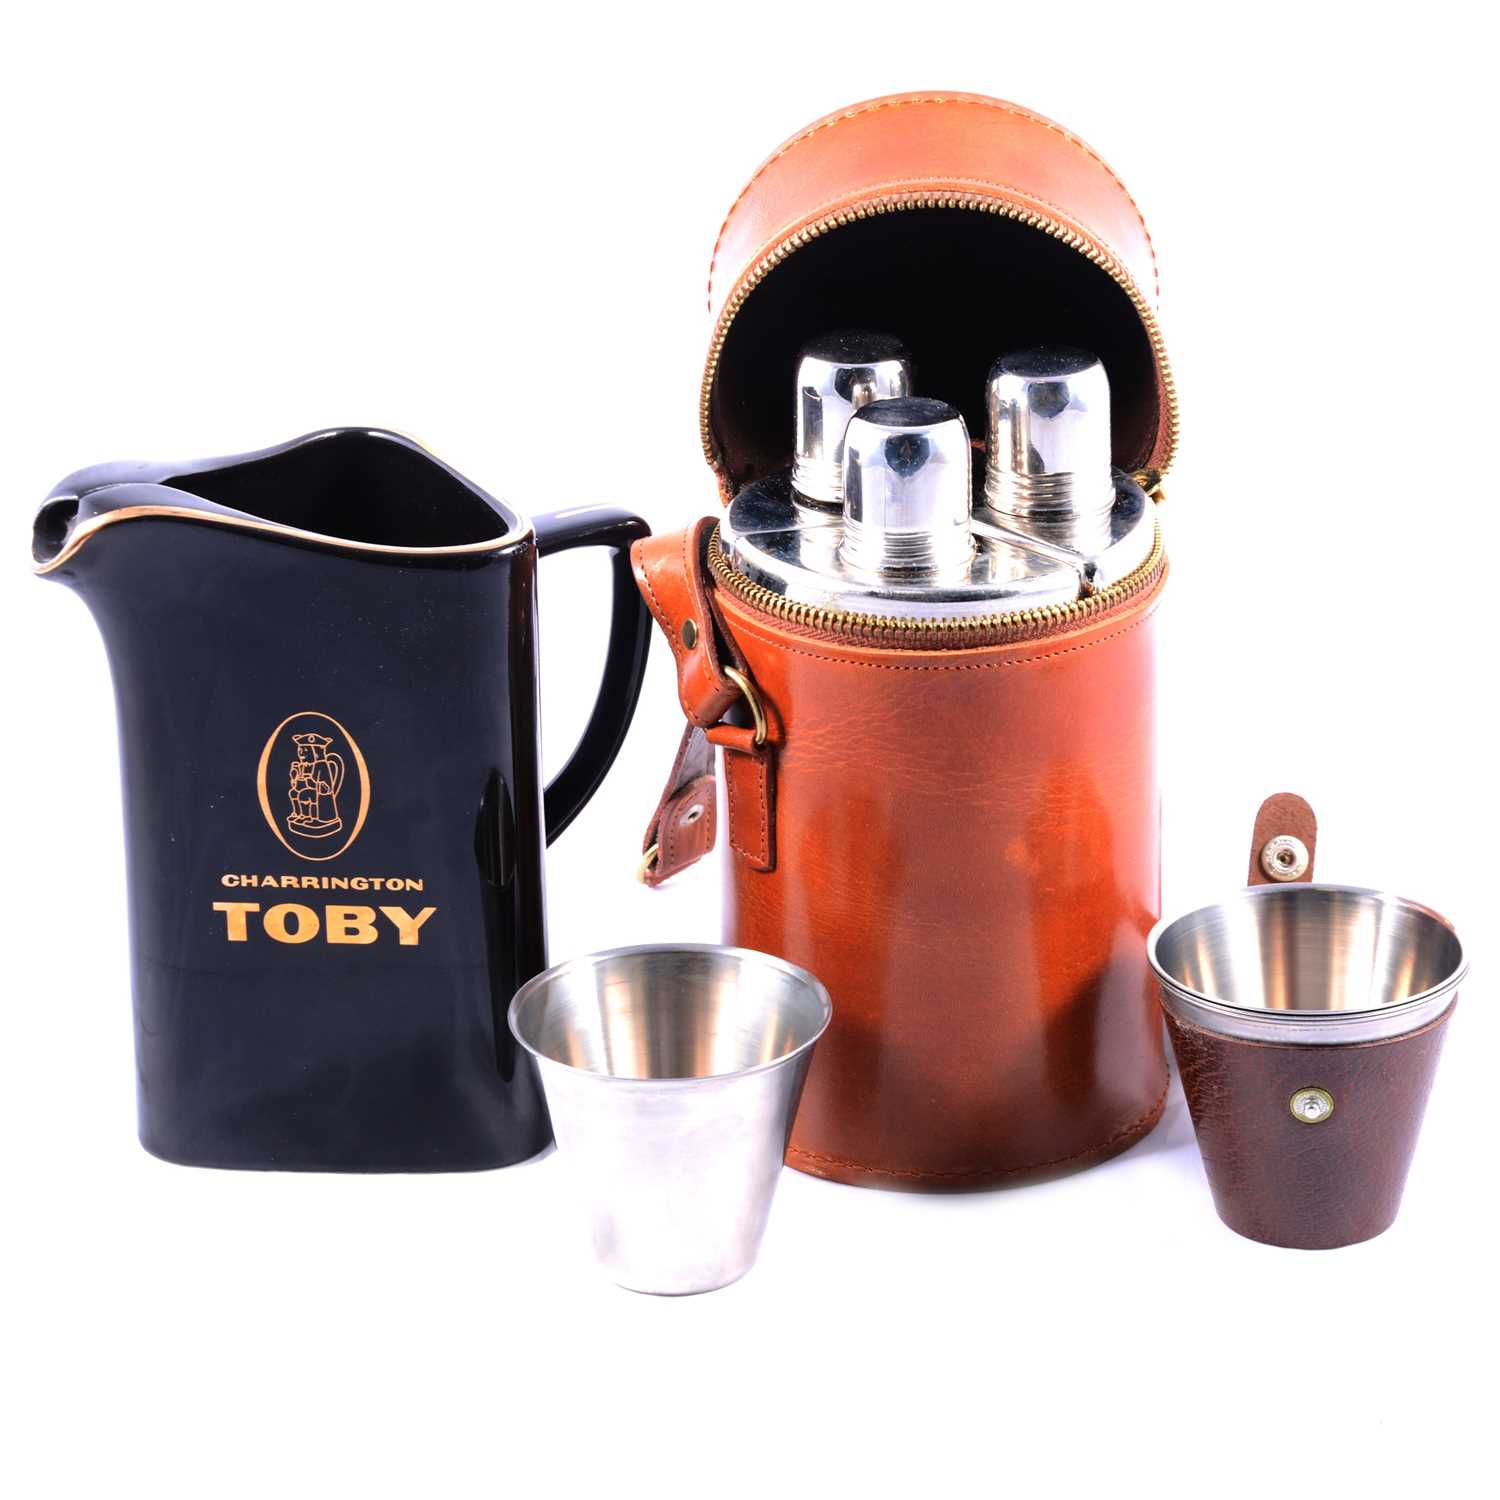 Three-bottle hunting flask, toddy cups, and a Charrington Toby whisky water jug.